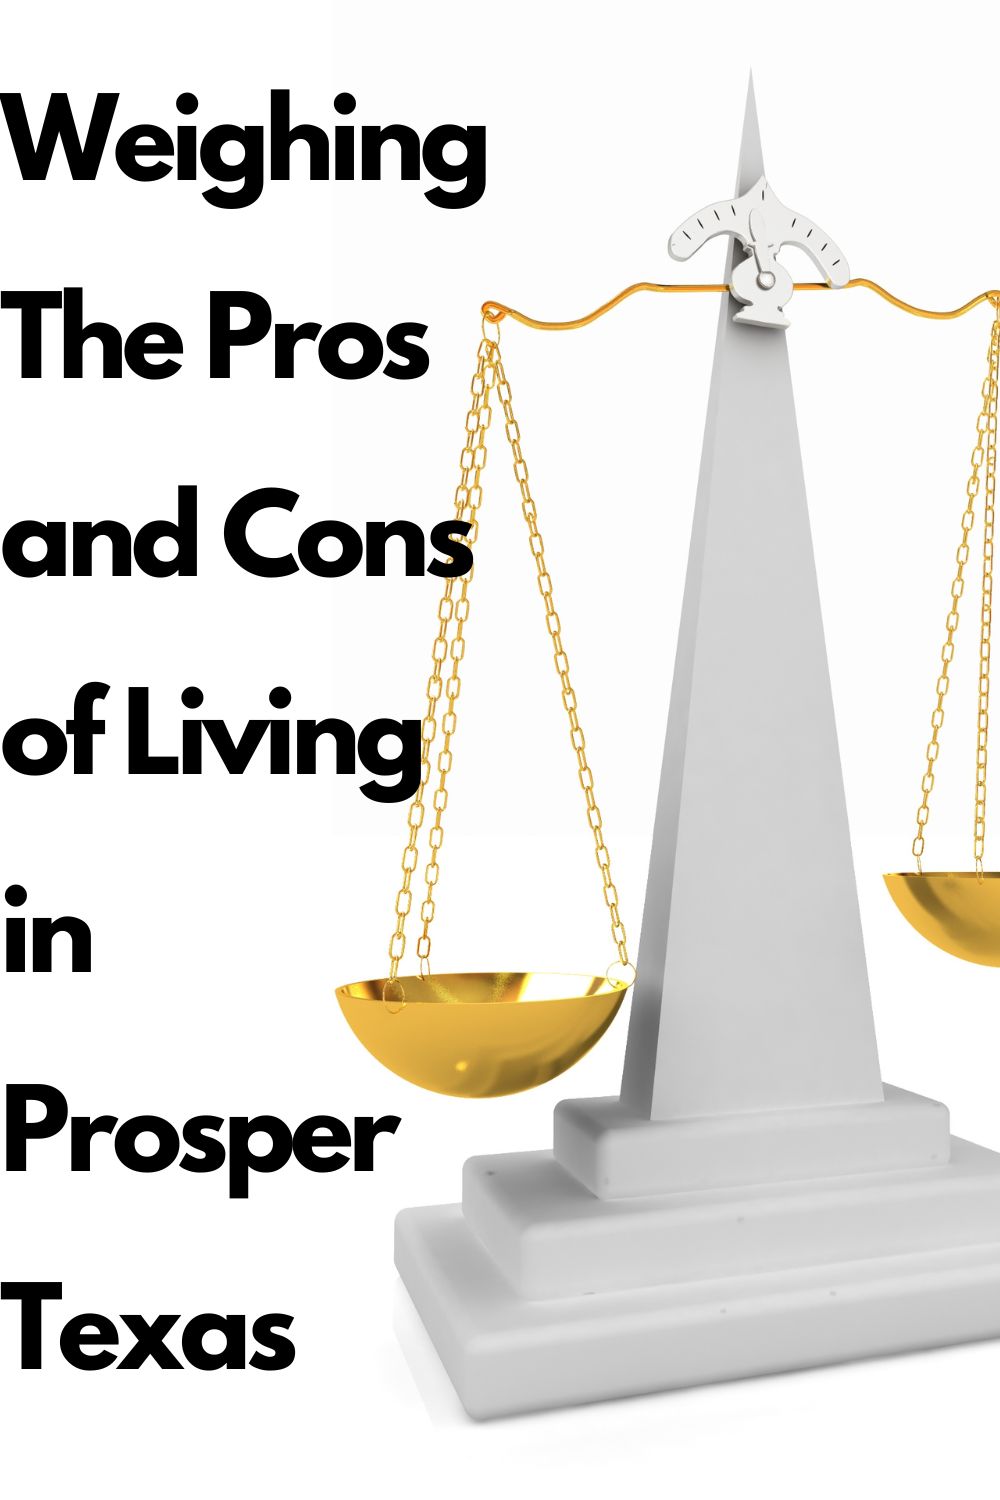 Weighing The Pros and Cons of Living in Prosper Texas